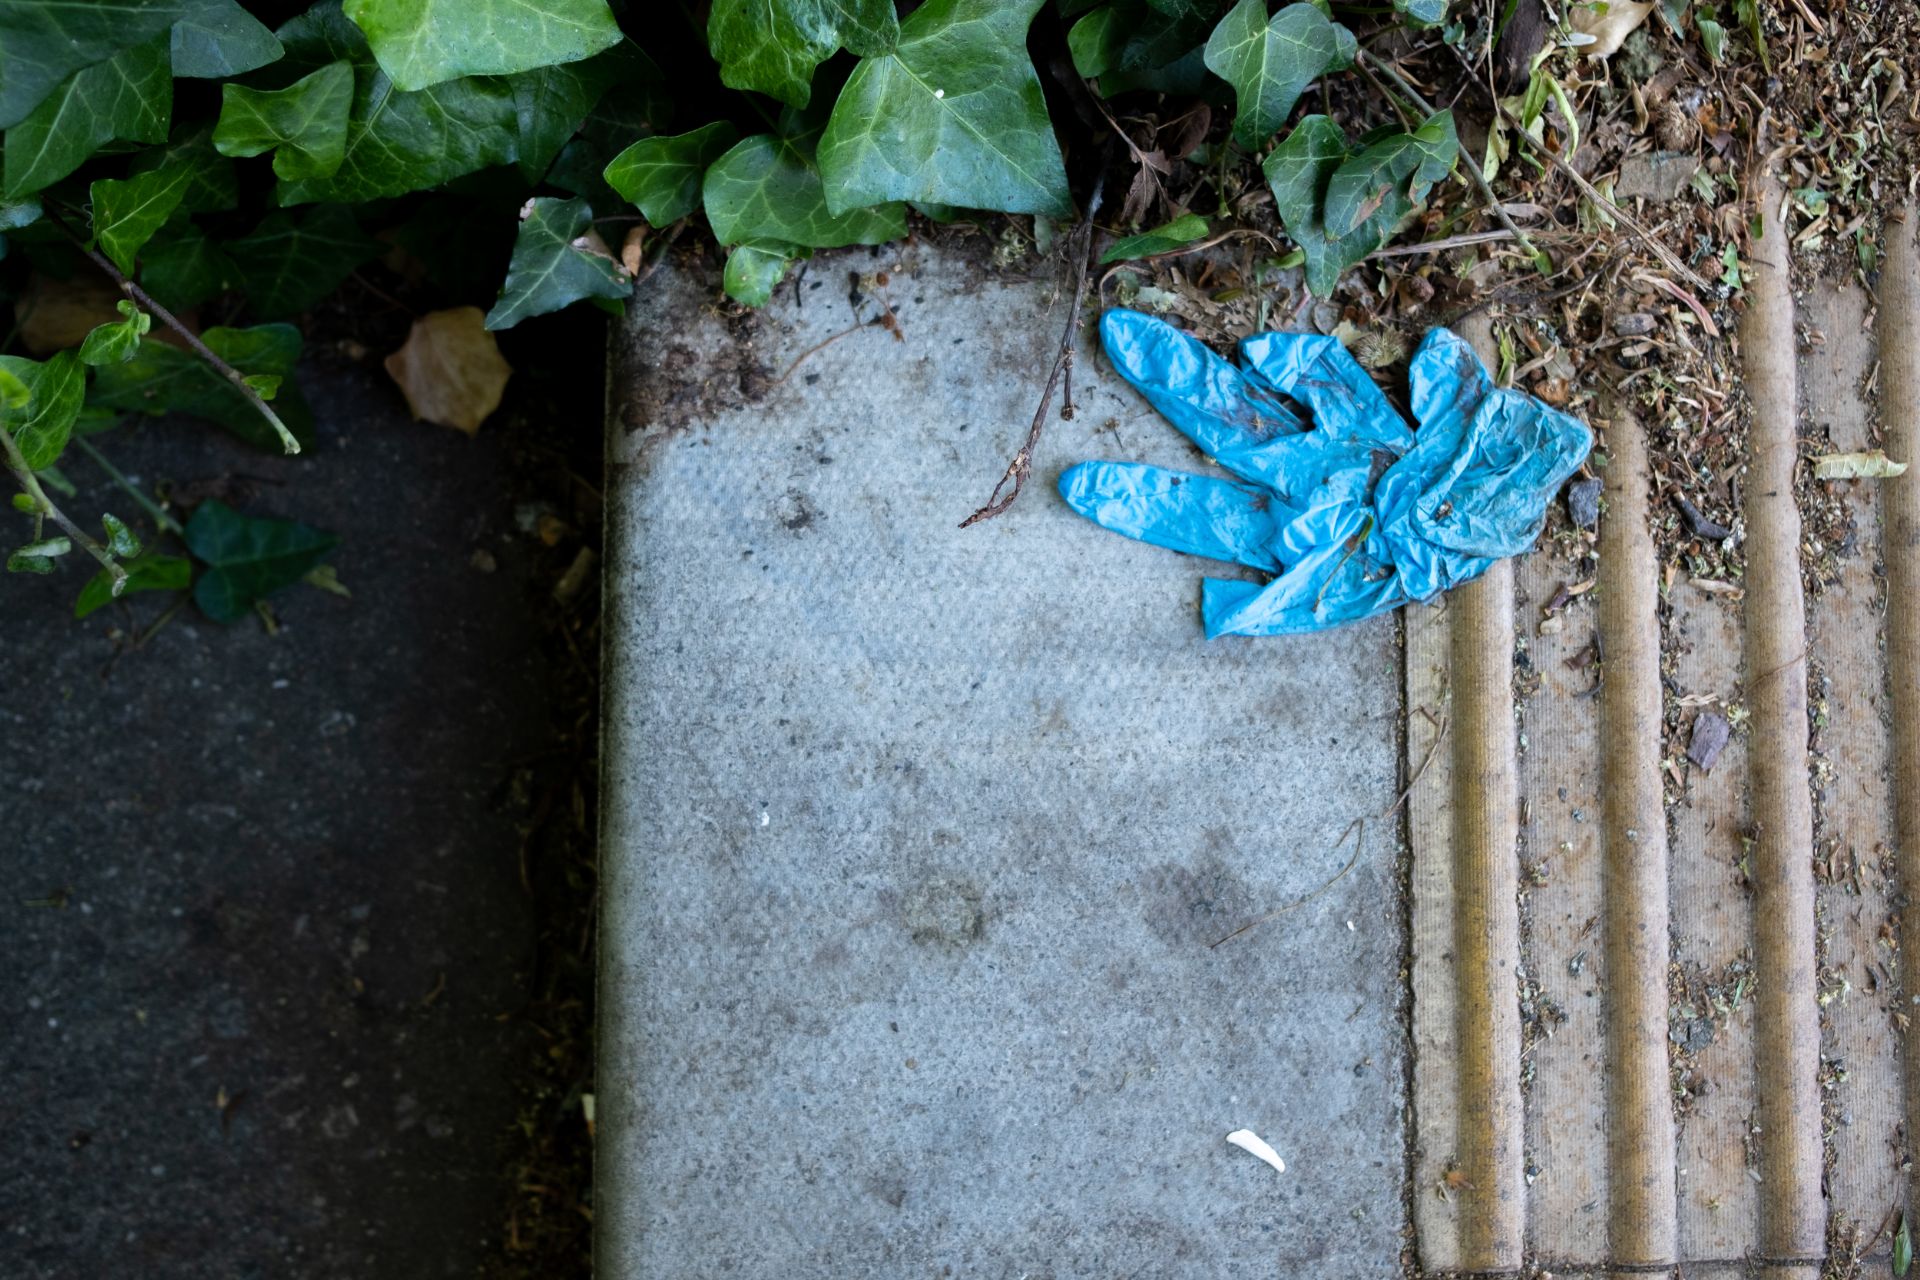 Exert from Jan Pavelka's book '2 metres apart' - picture shows a discarded blue rubber glove